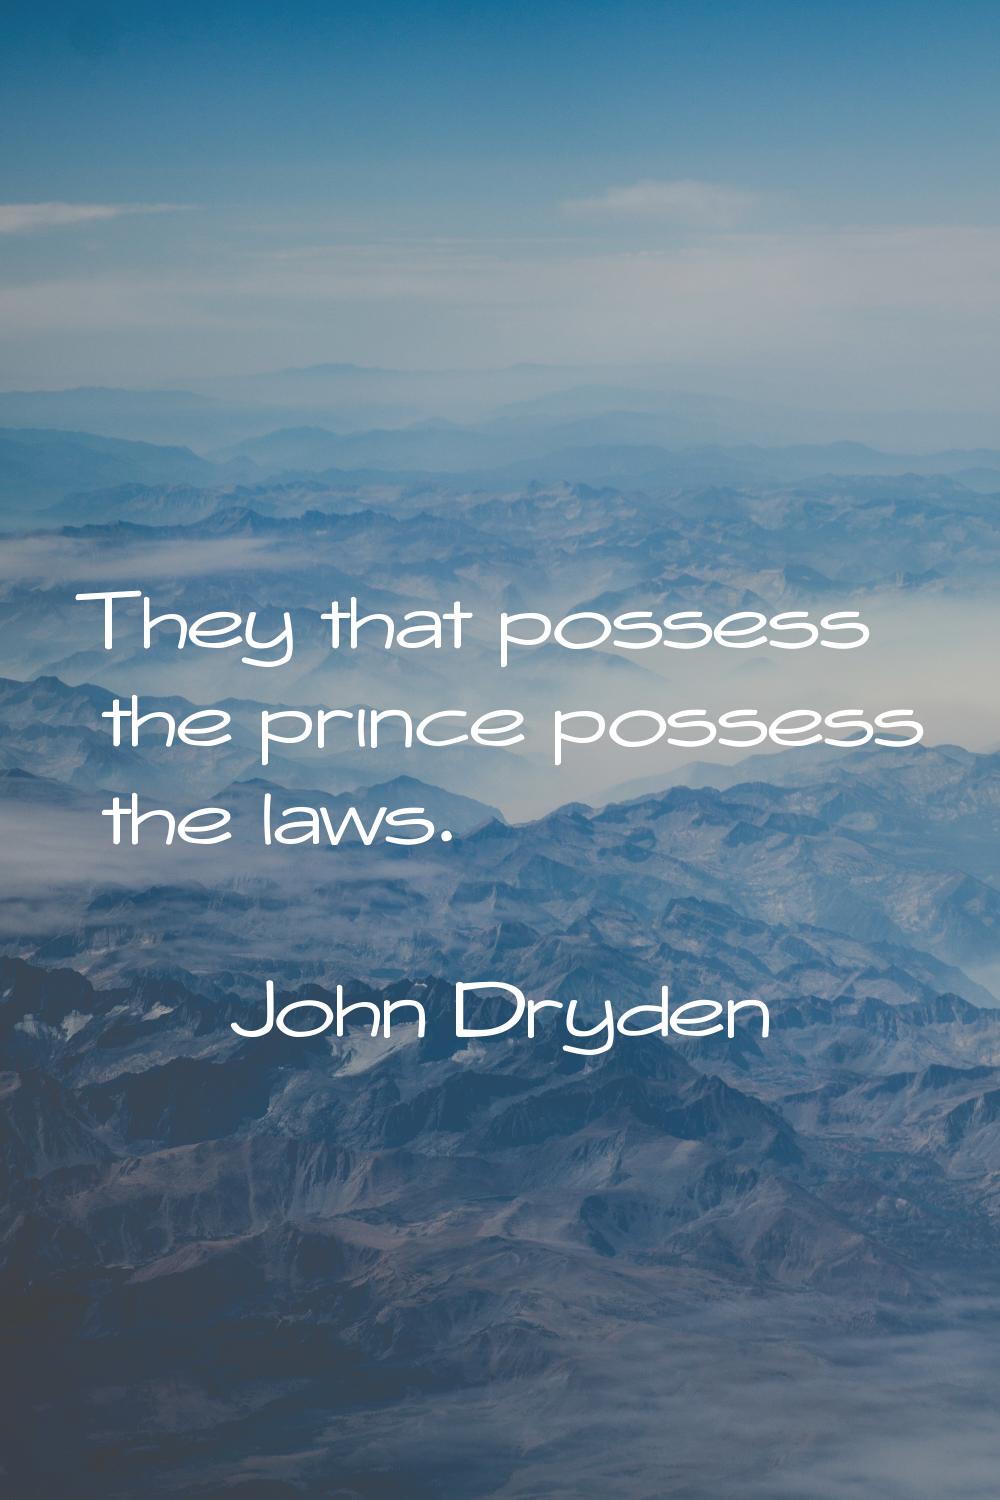 They that possess the prince possess the laws.